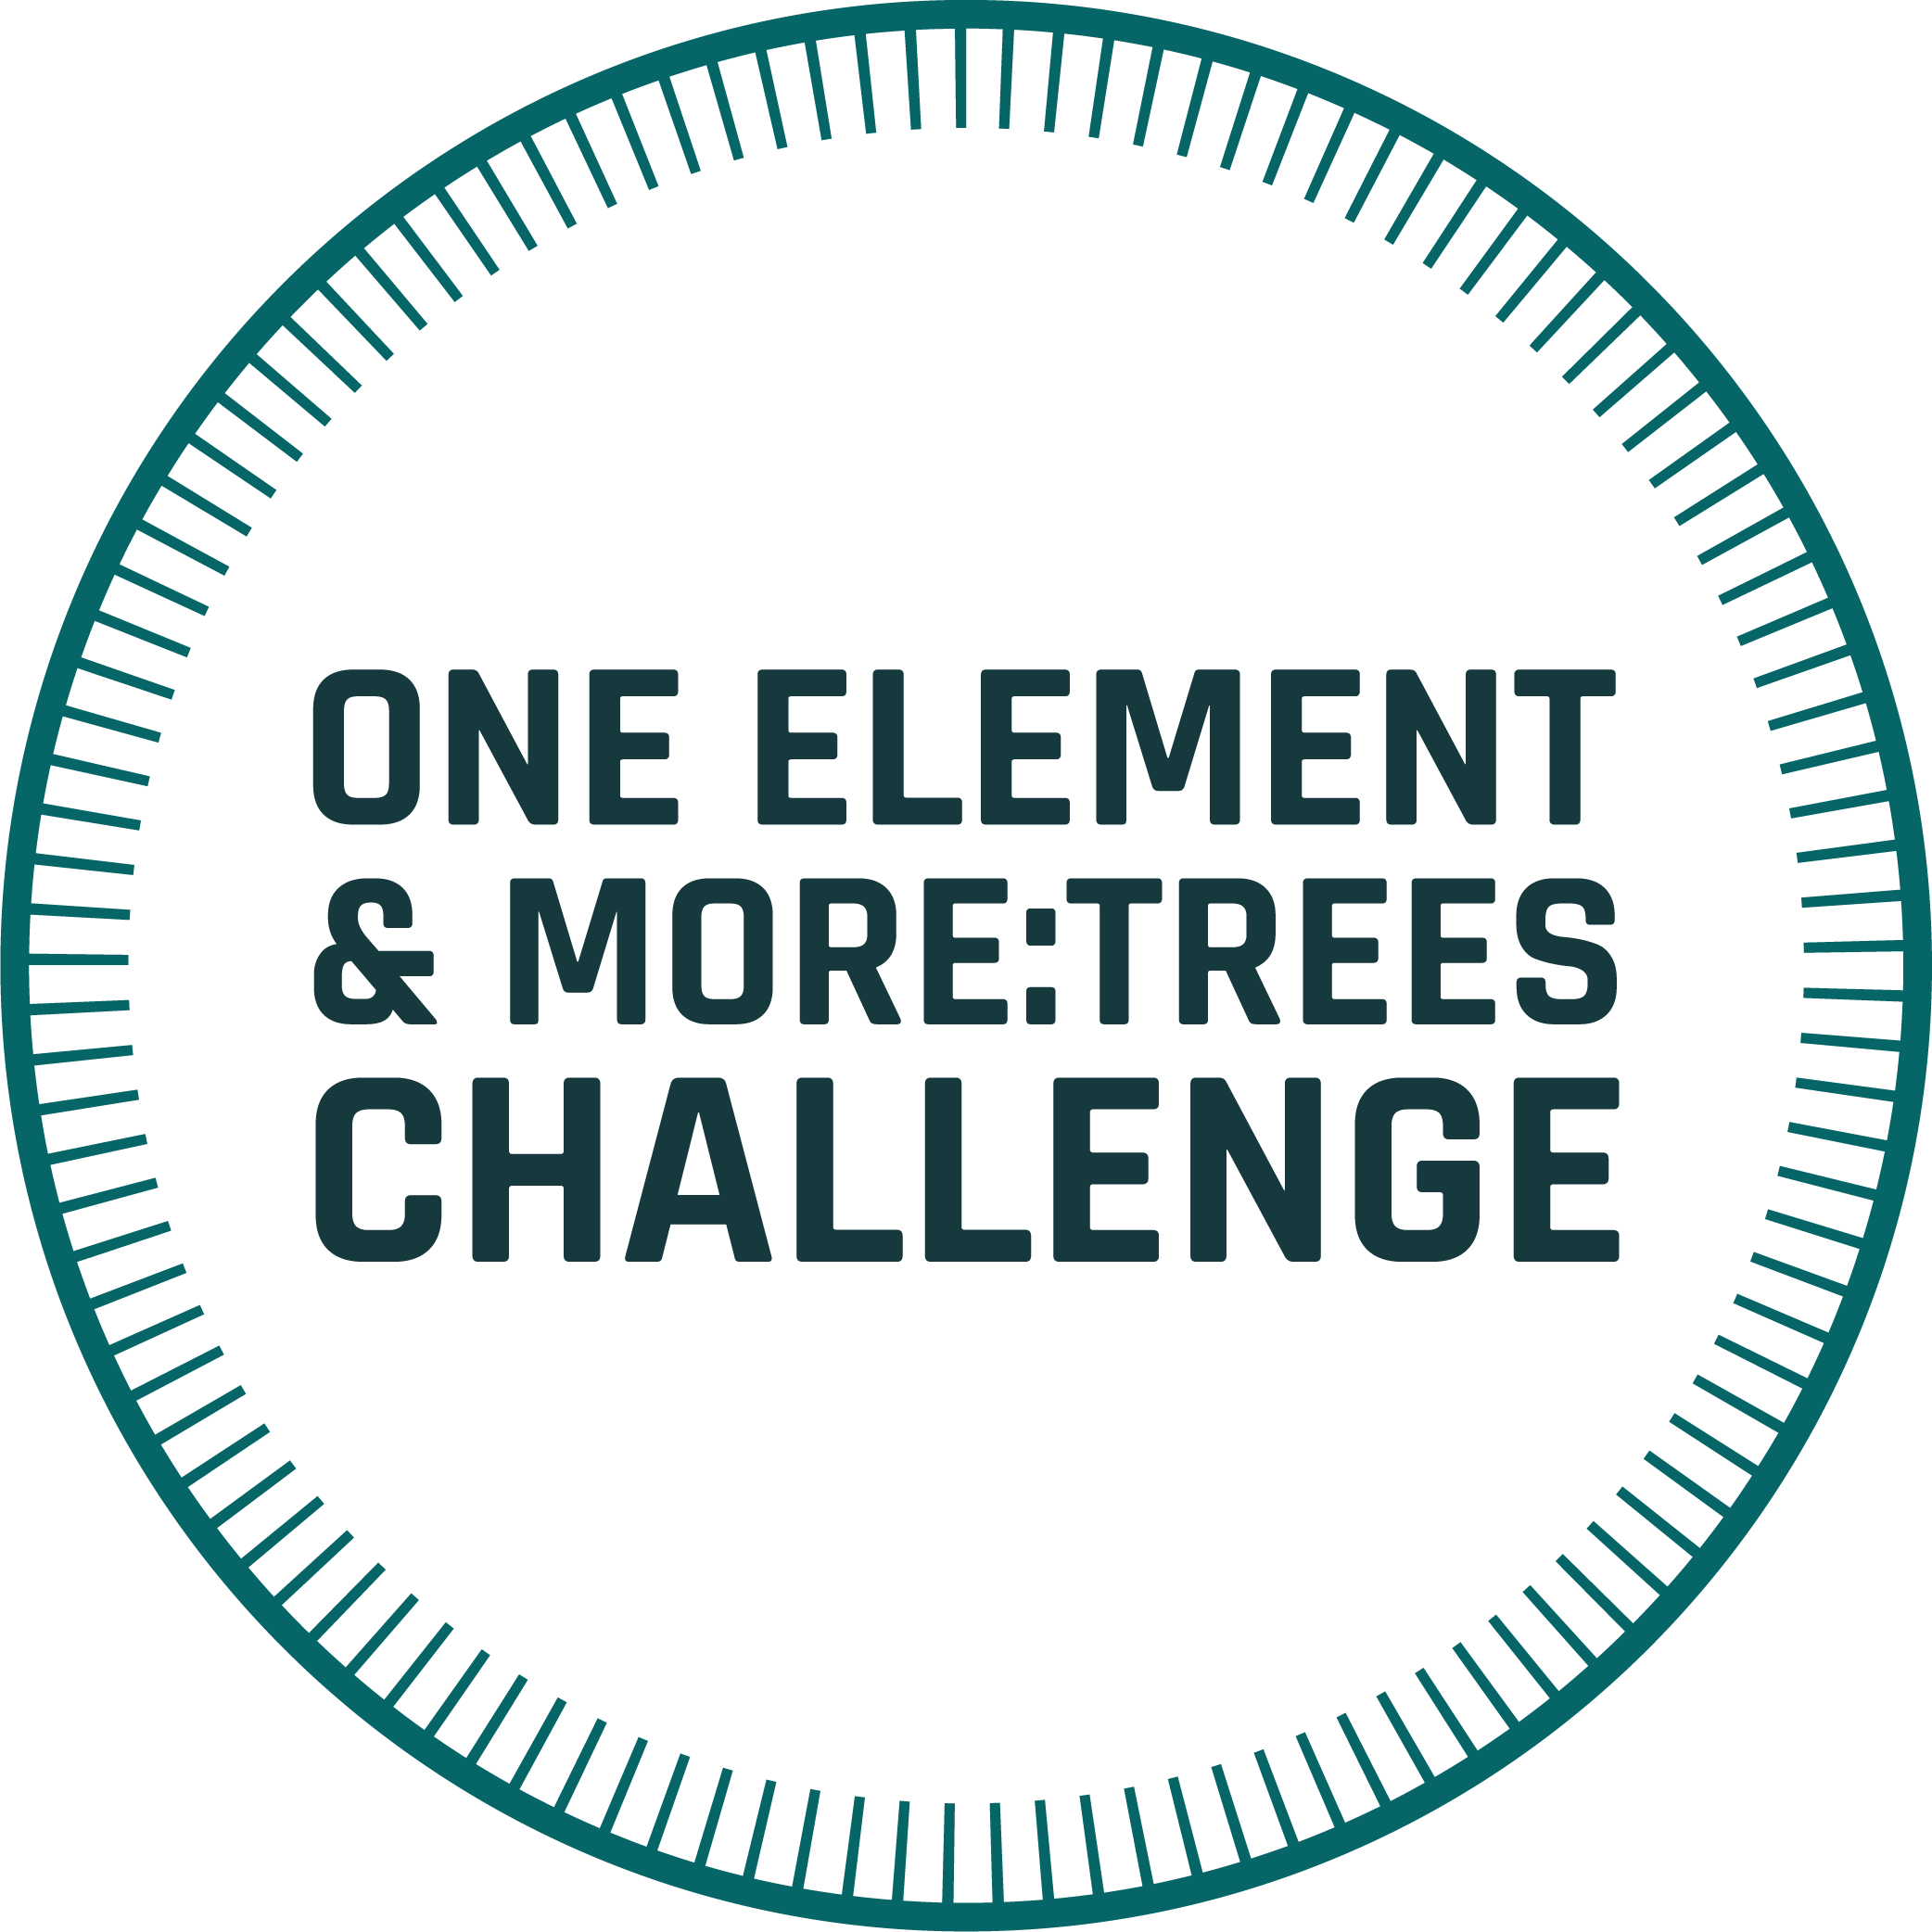 One Element & More:Trees Challenge